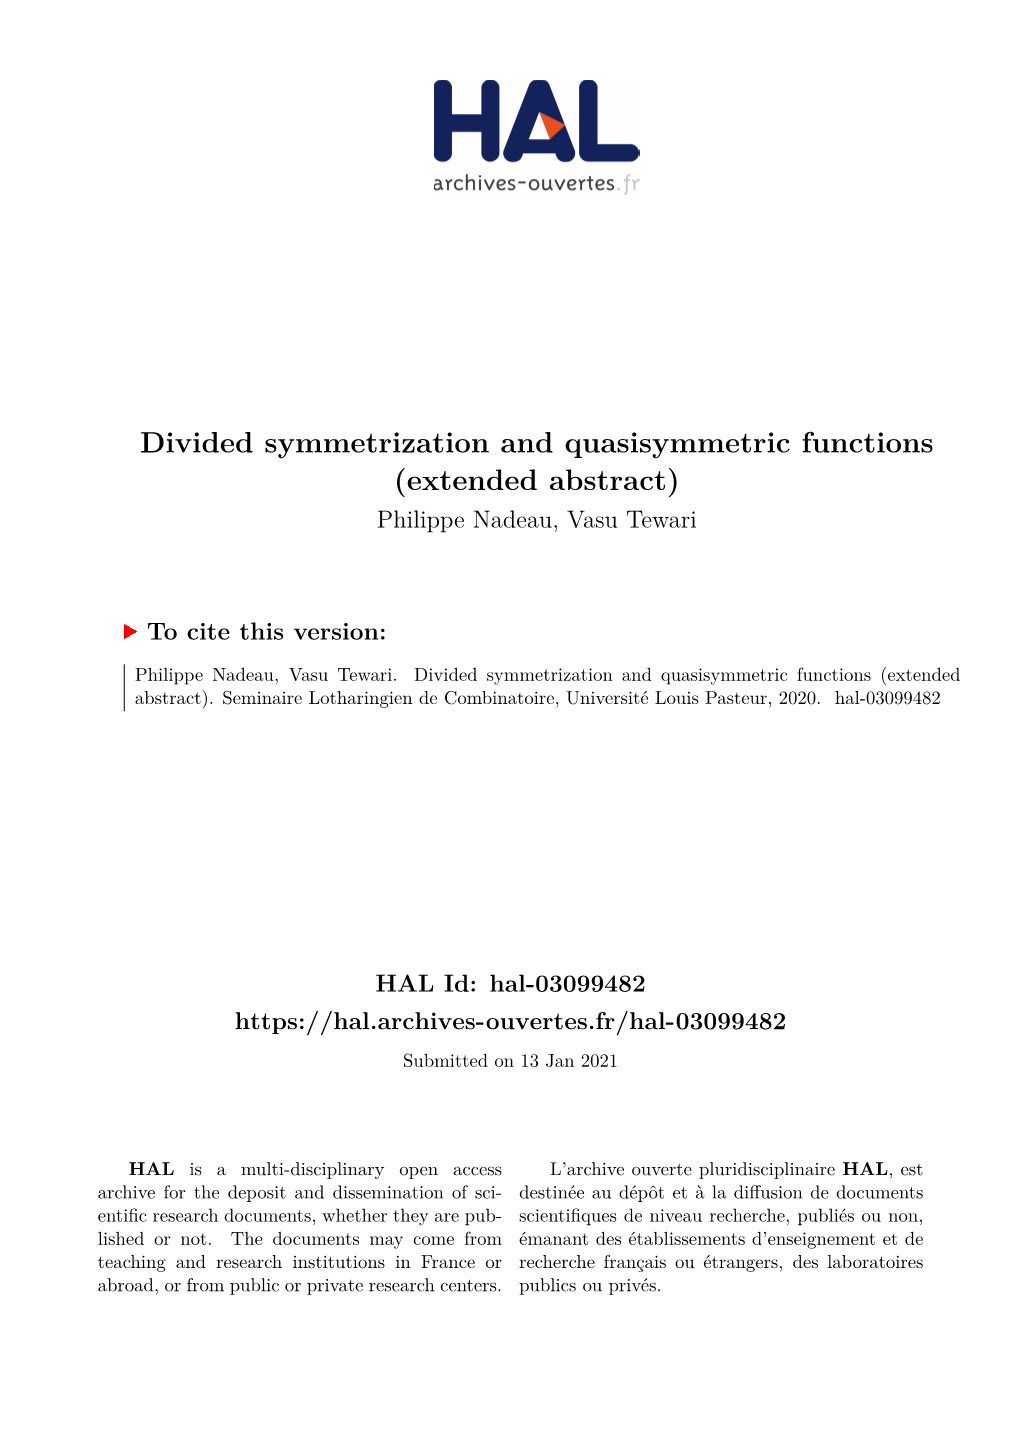 Divided Symmetrization and Quasisymmetric Functions (Extended Abstract) Philippe Nadeau, Vasu Tewari